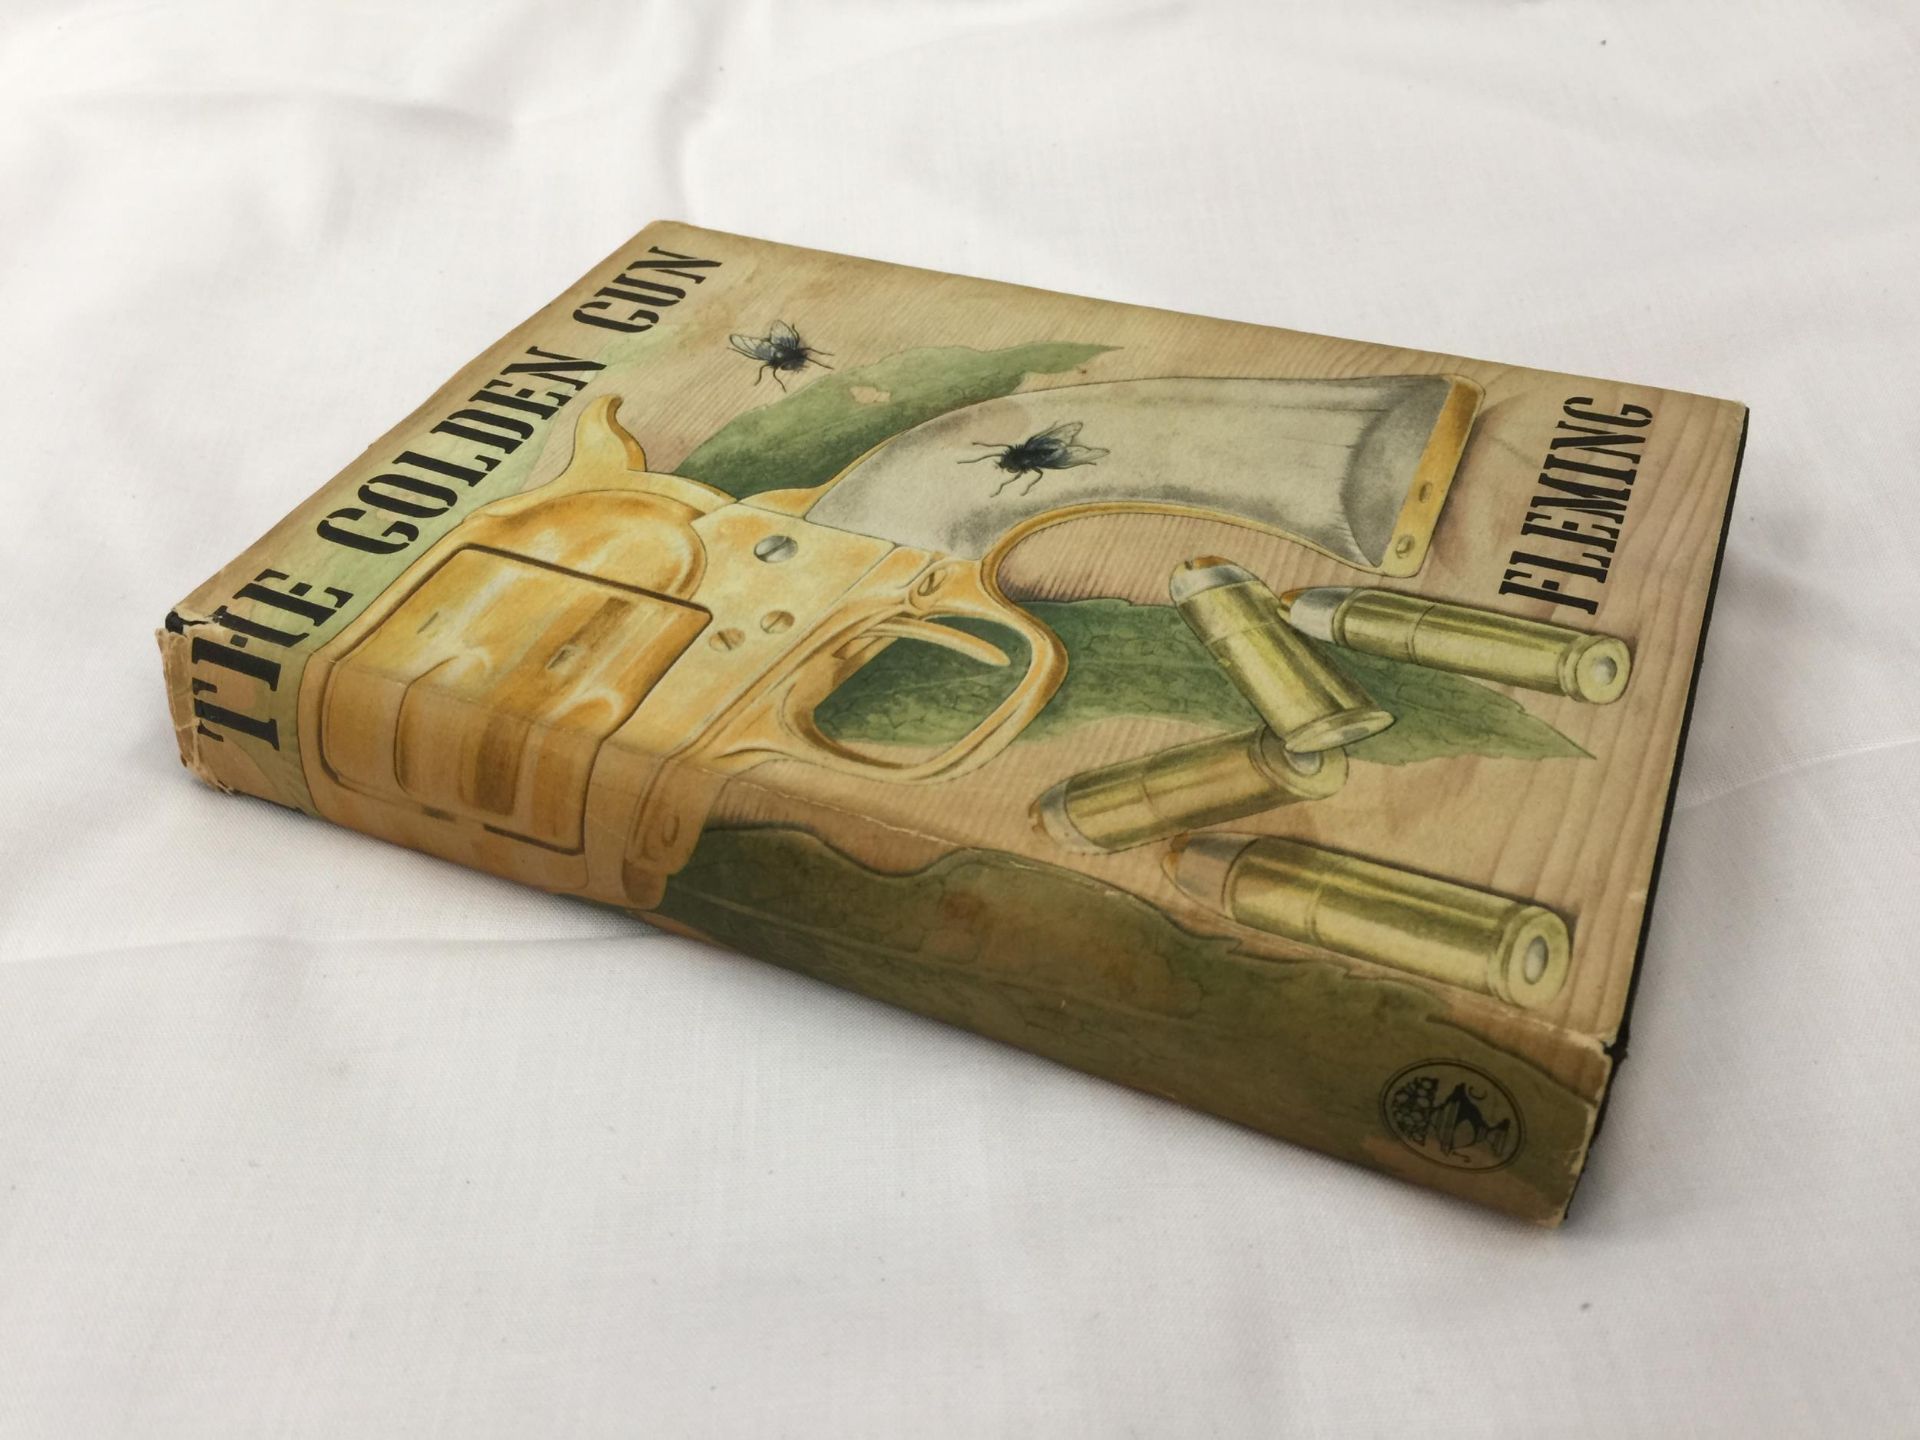 A FIRST EDITION JAMES BOND NOVEL - THE MAN WITH THE GOLDEN GUN BY IAN FLEMING, HARDBACK WITH DUST - Image 2 of 11